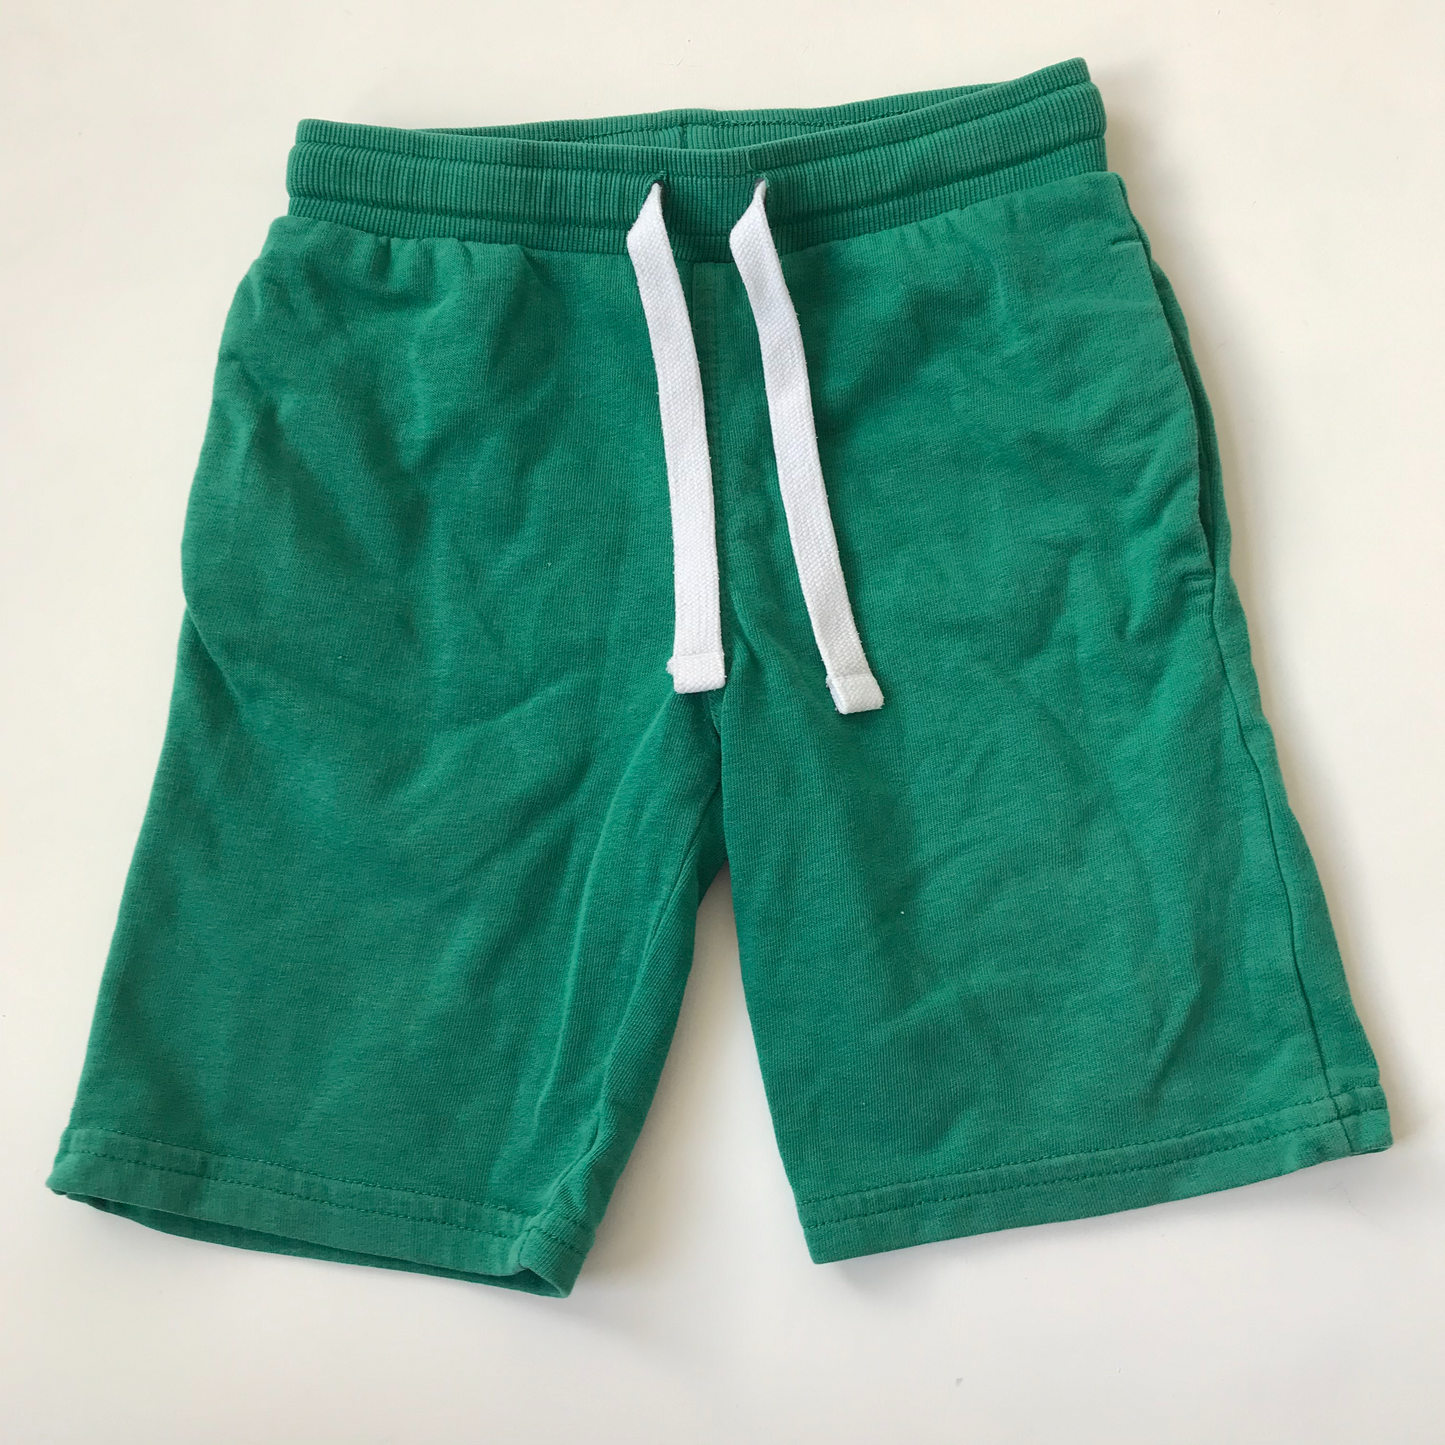 Shorts - Green Jersey - Age 5